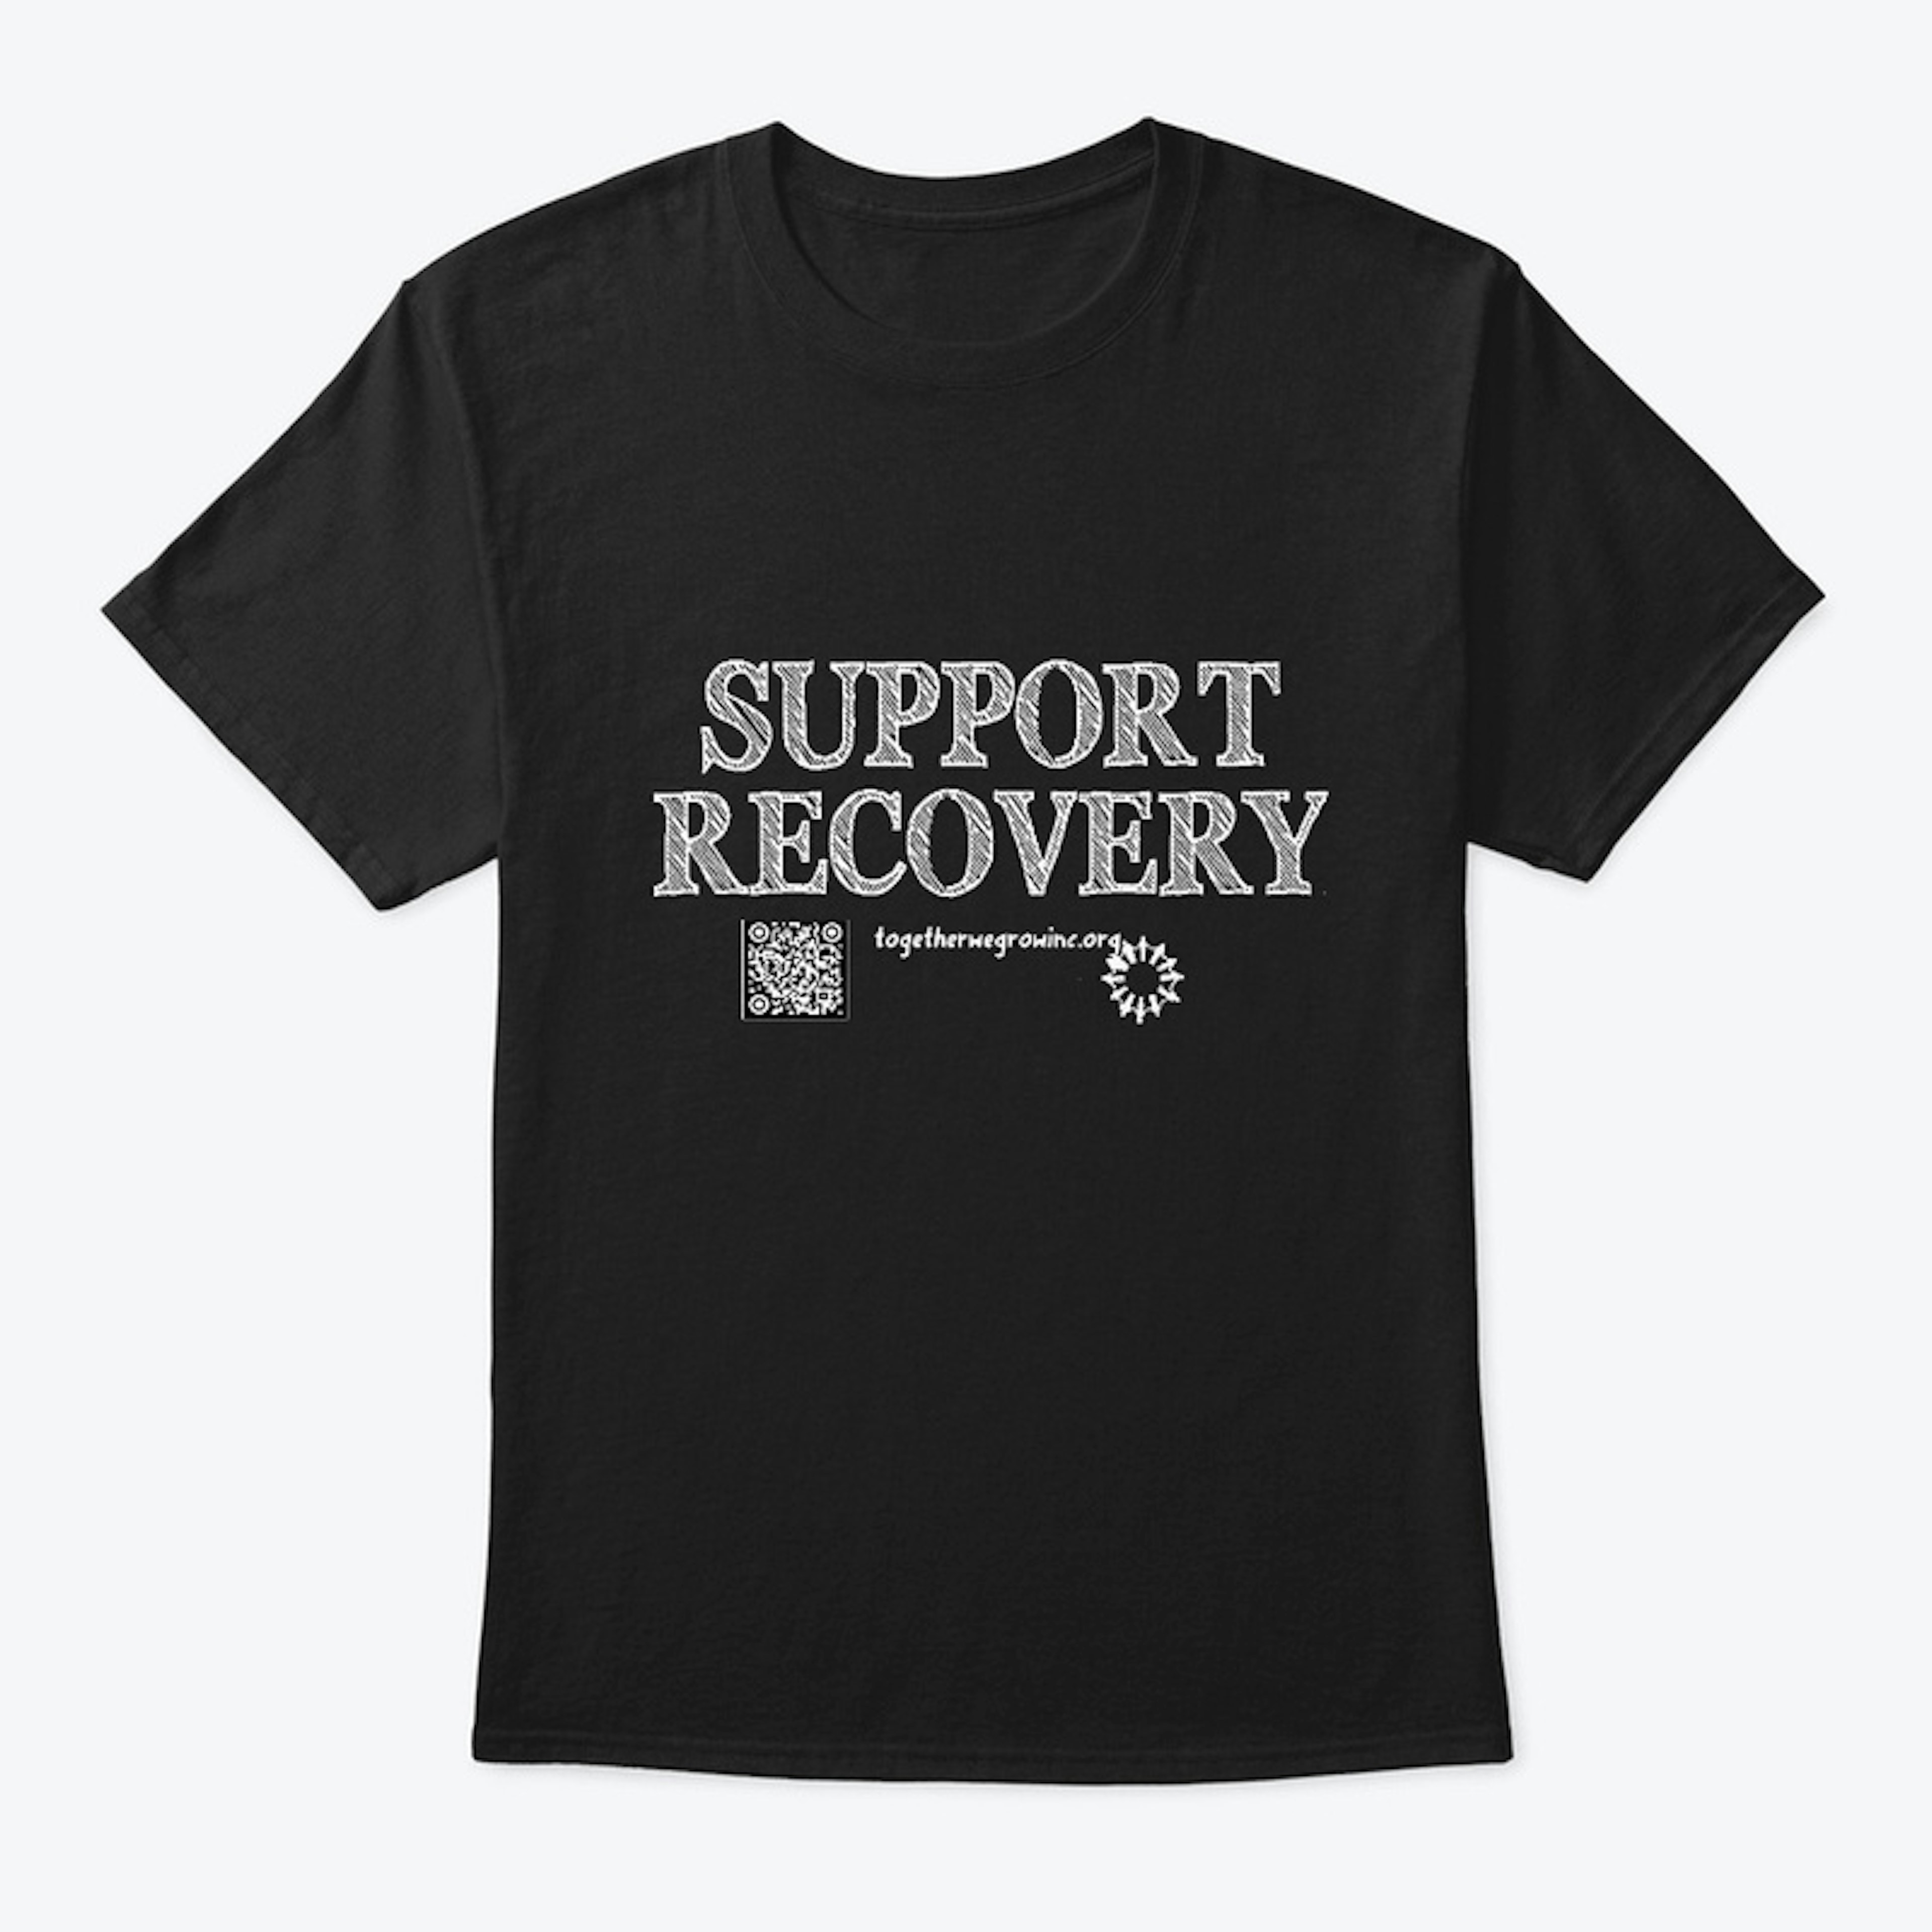 SUPPORT RECOVERY